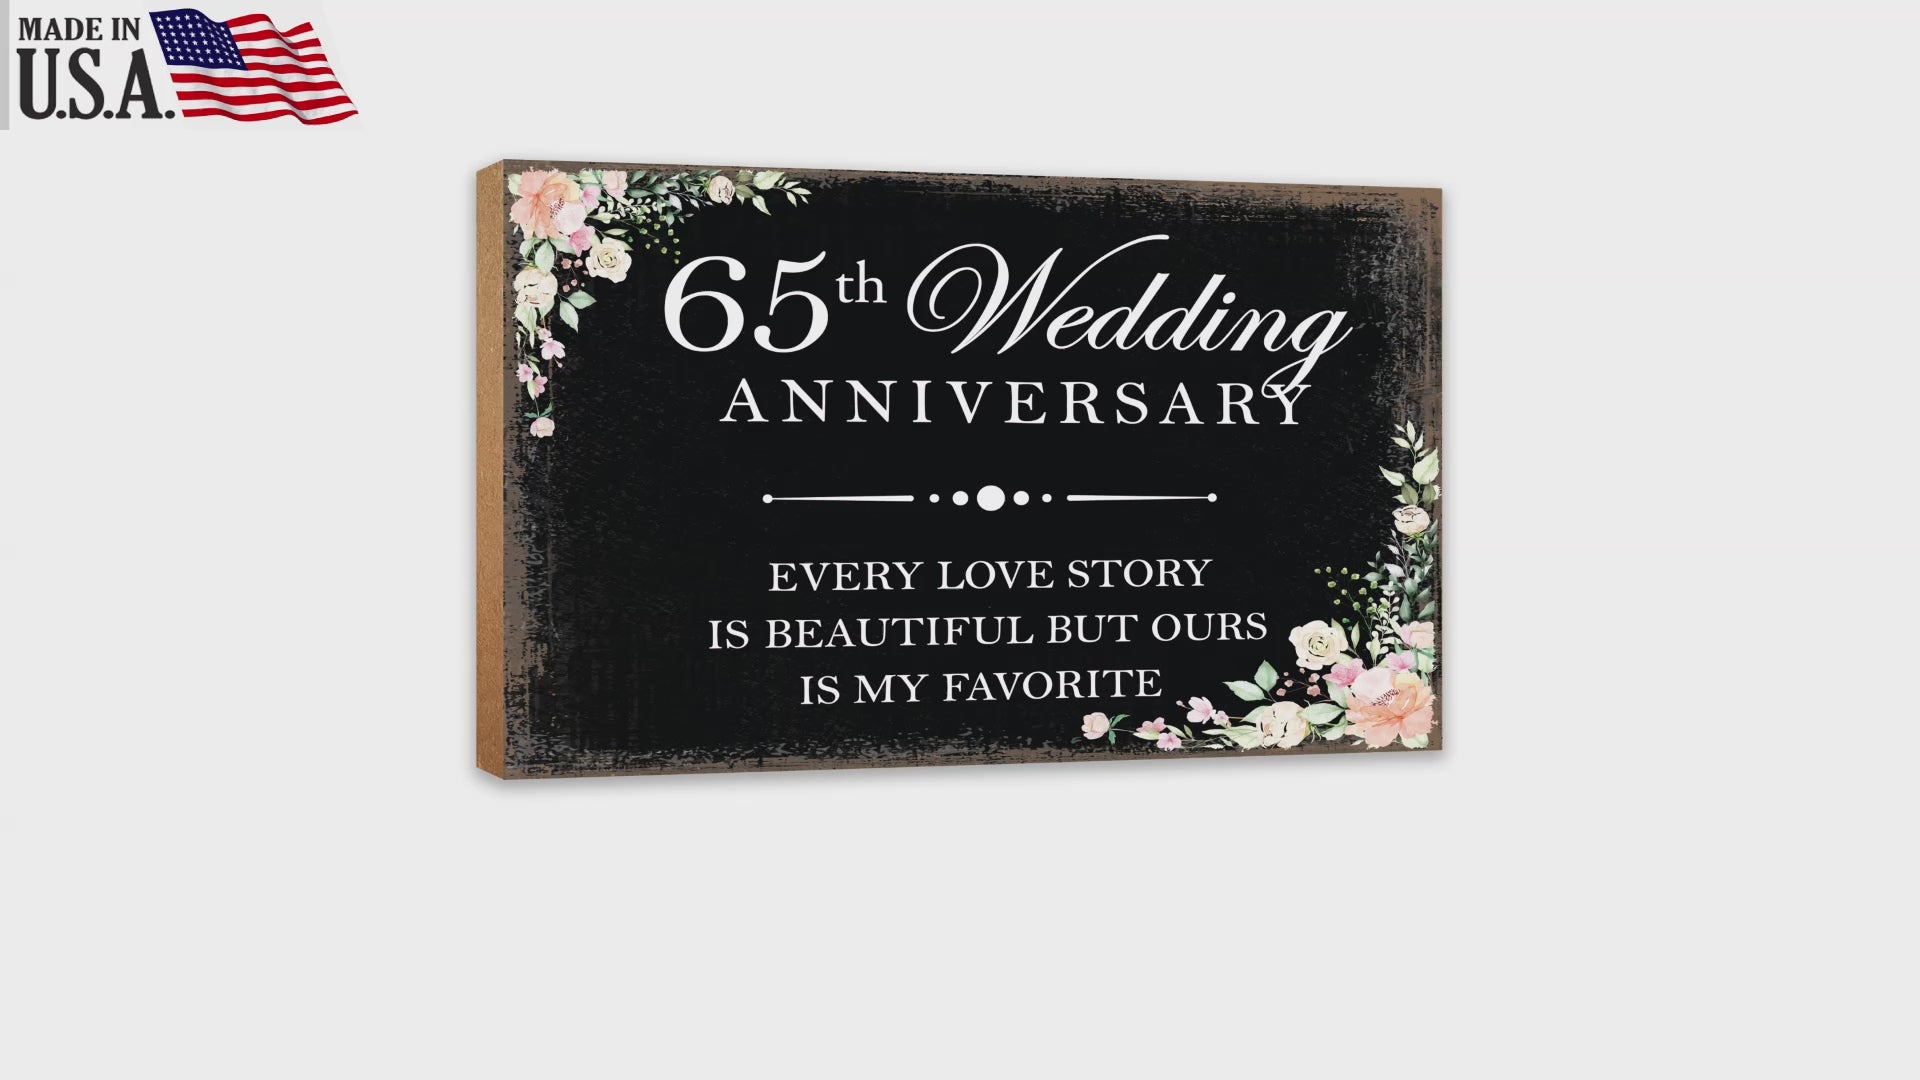 65th Wedding Anniversary Unique Shelf Decor and Tabletop Signs Gift for Couples - Every Love Story